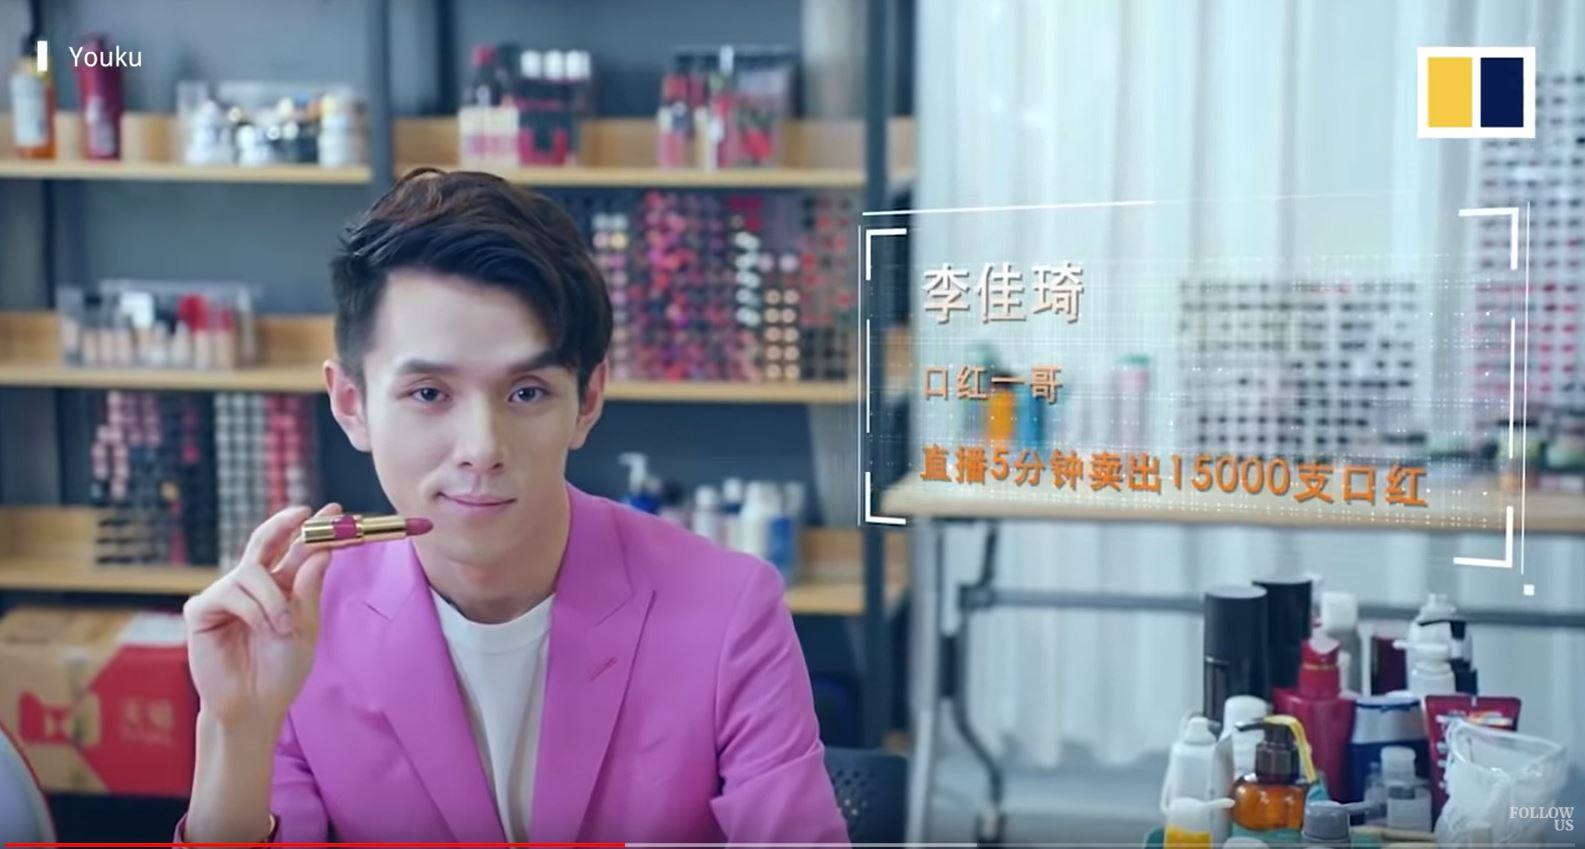 Li Jiaqi, known in China as the “lipstick king”, was among several top live-streamers called out by a consumer rights watchdog over violating industry rules. Photo: Youku